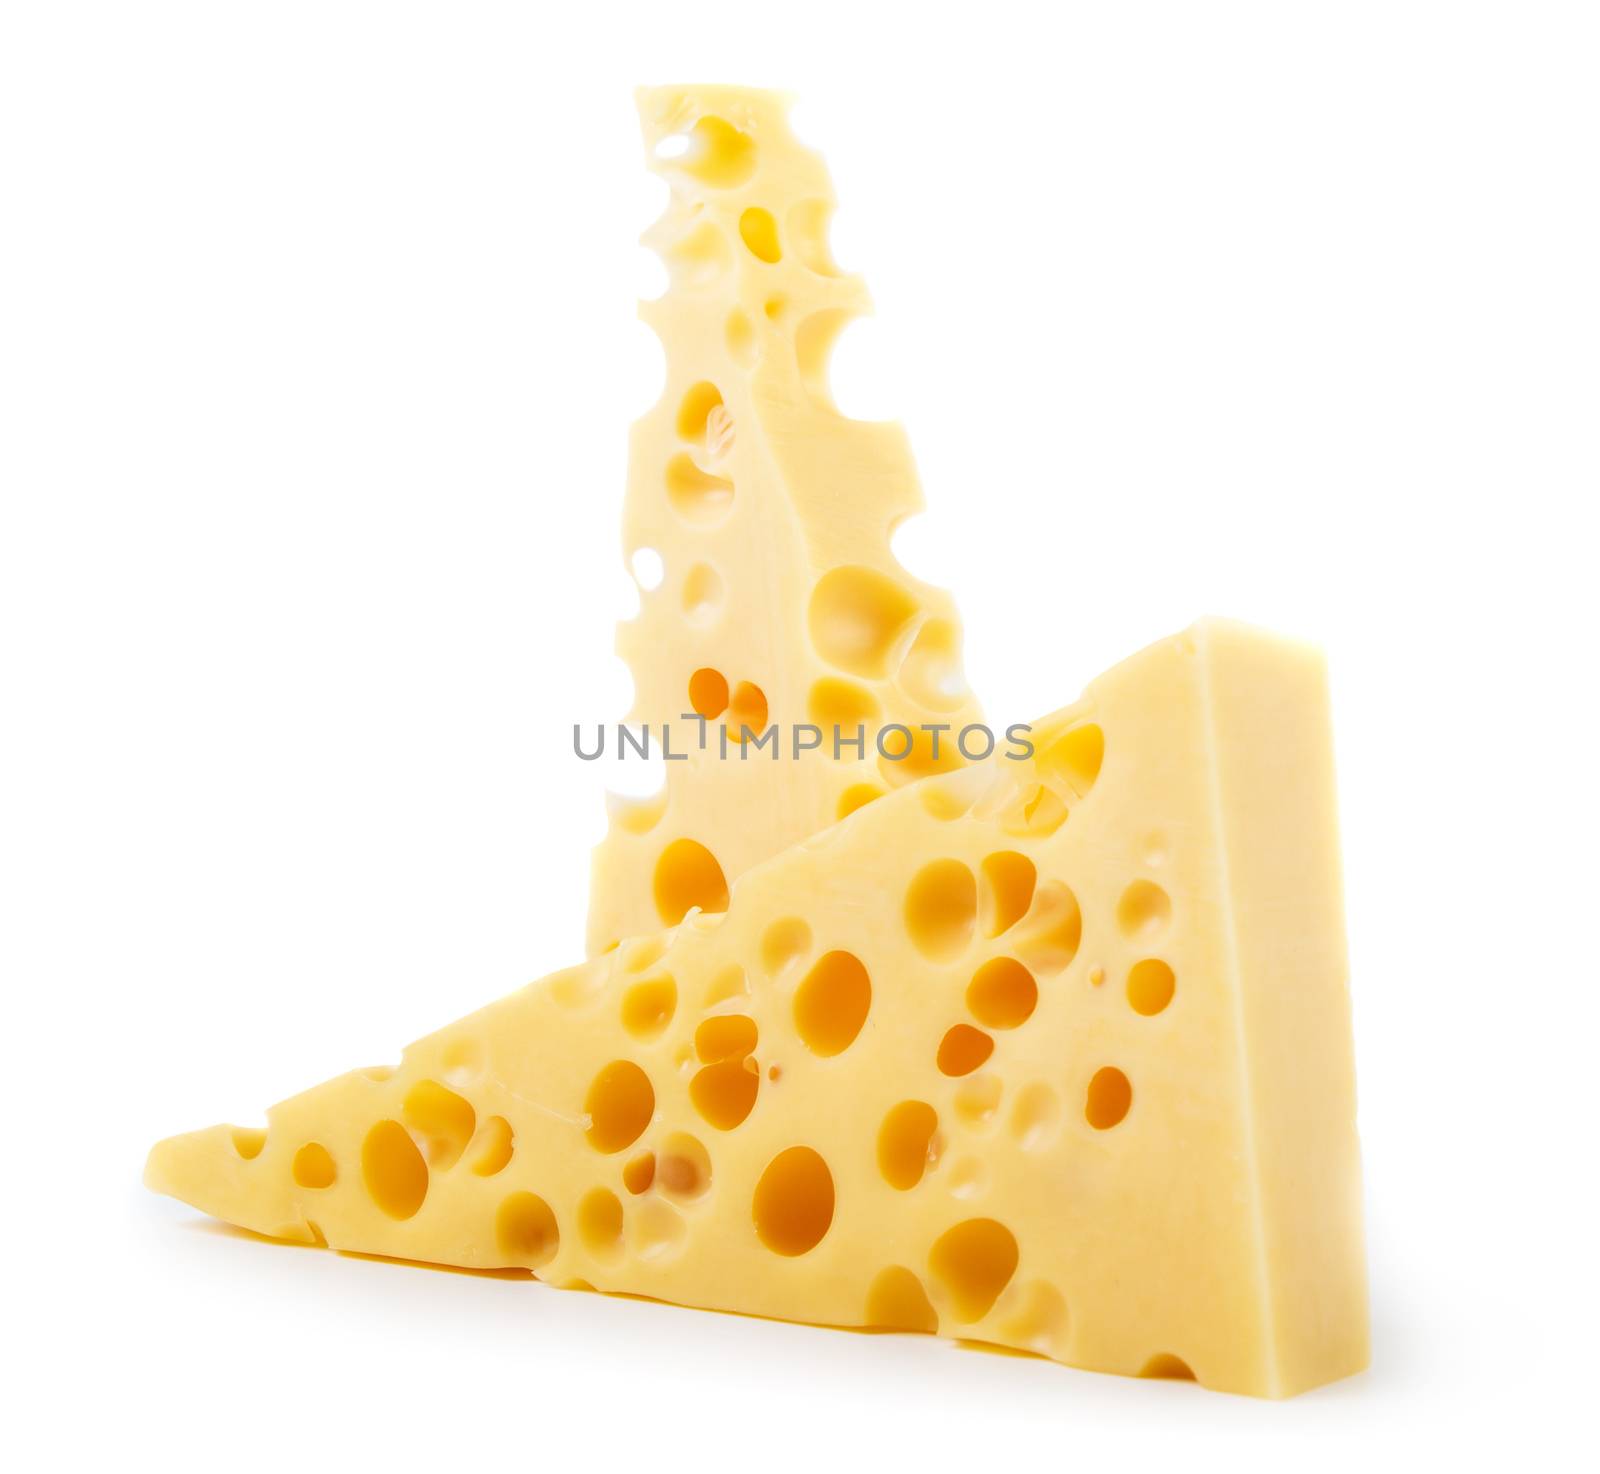 Pieces of cheese isolated on white background